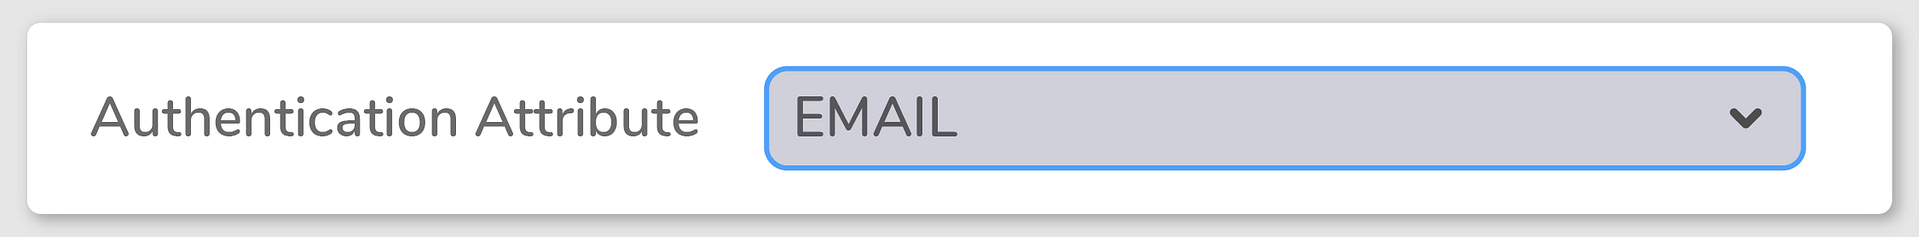 authentication attribute email